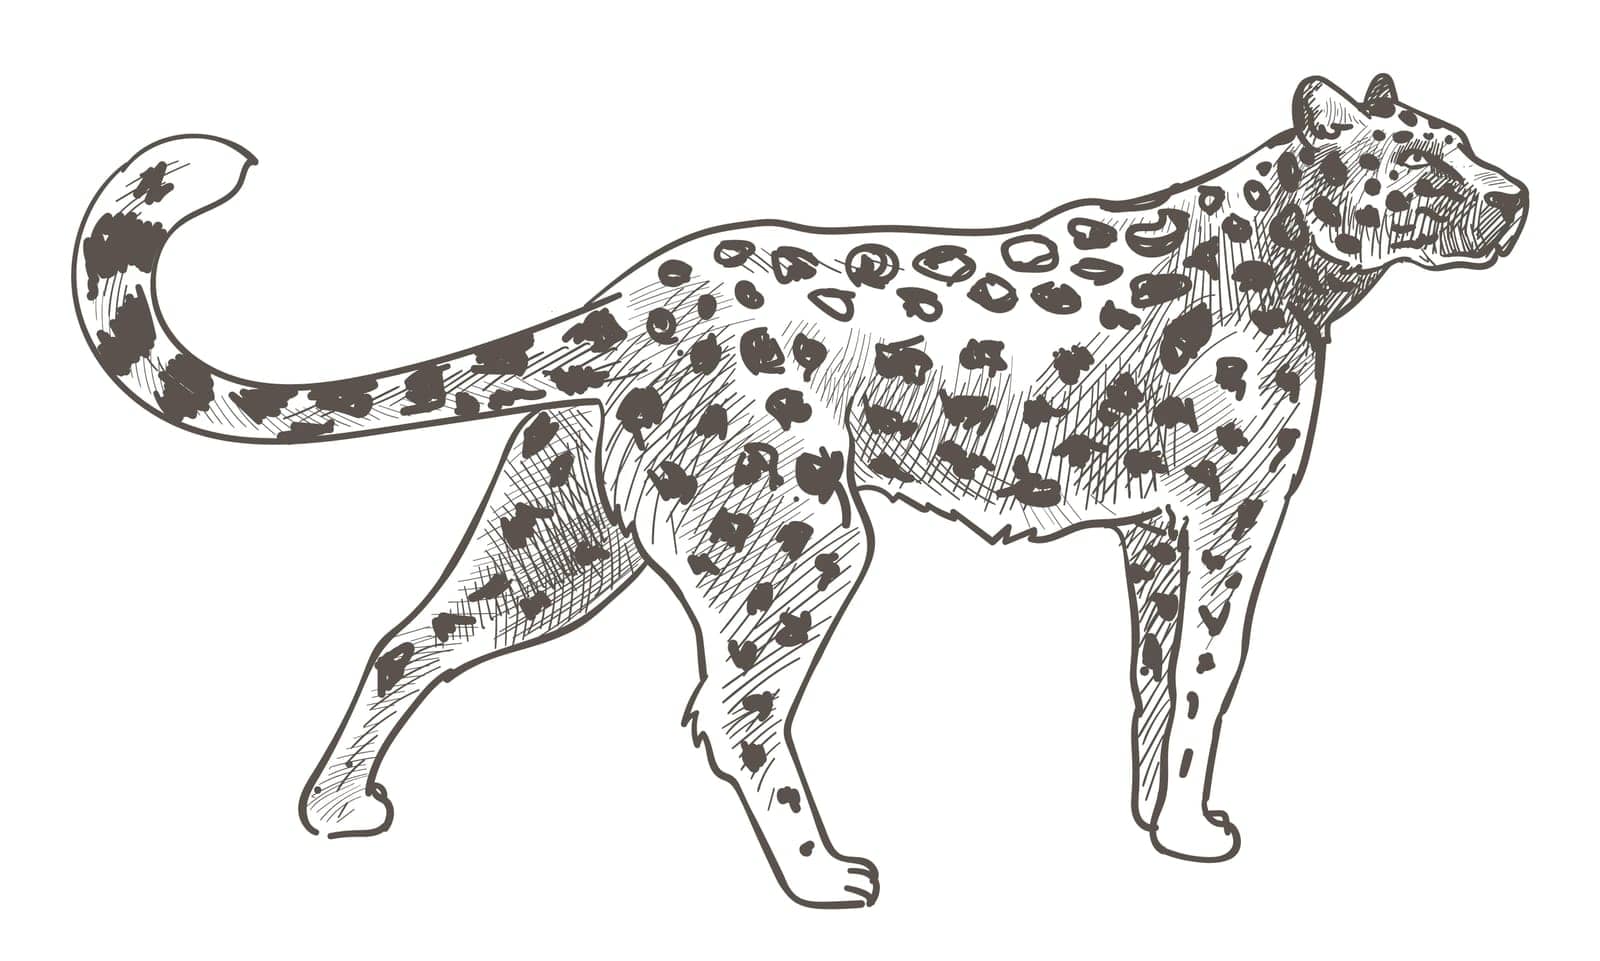 Leopard animal with spots on fur, cheetah in zoo by Sonulkaster